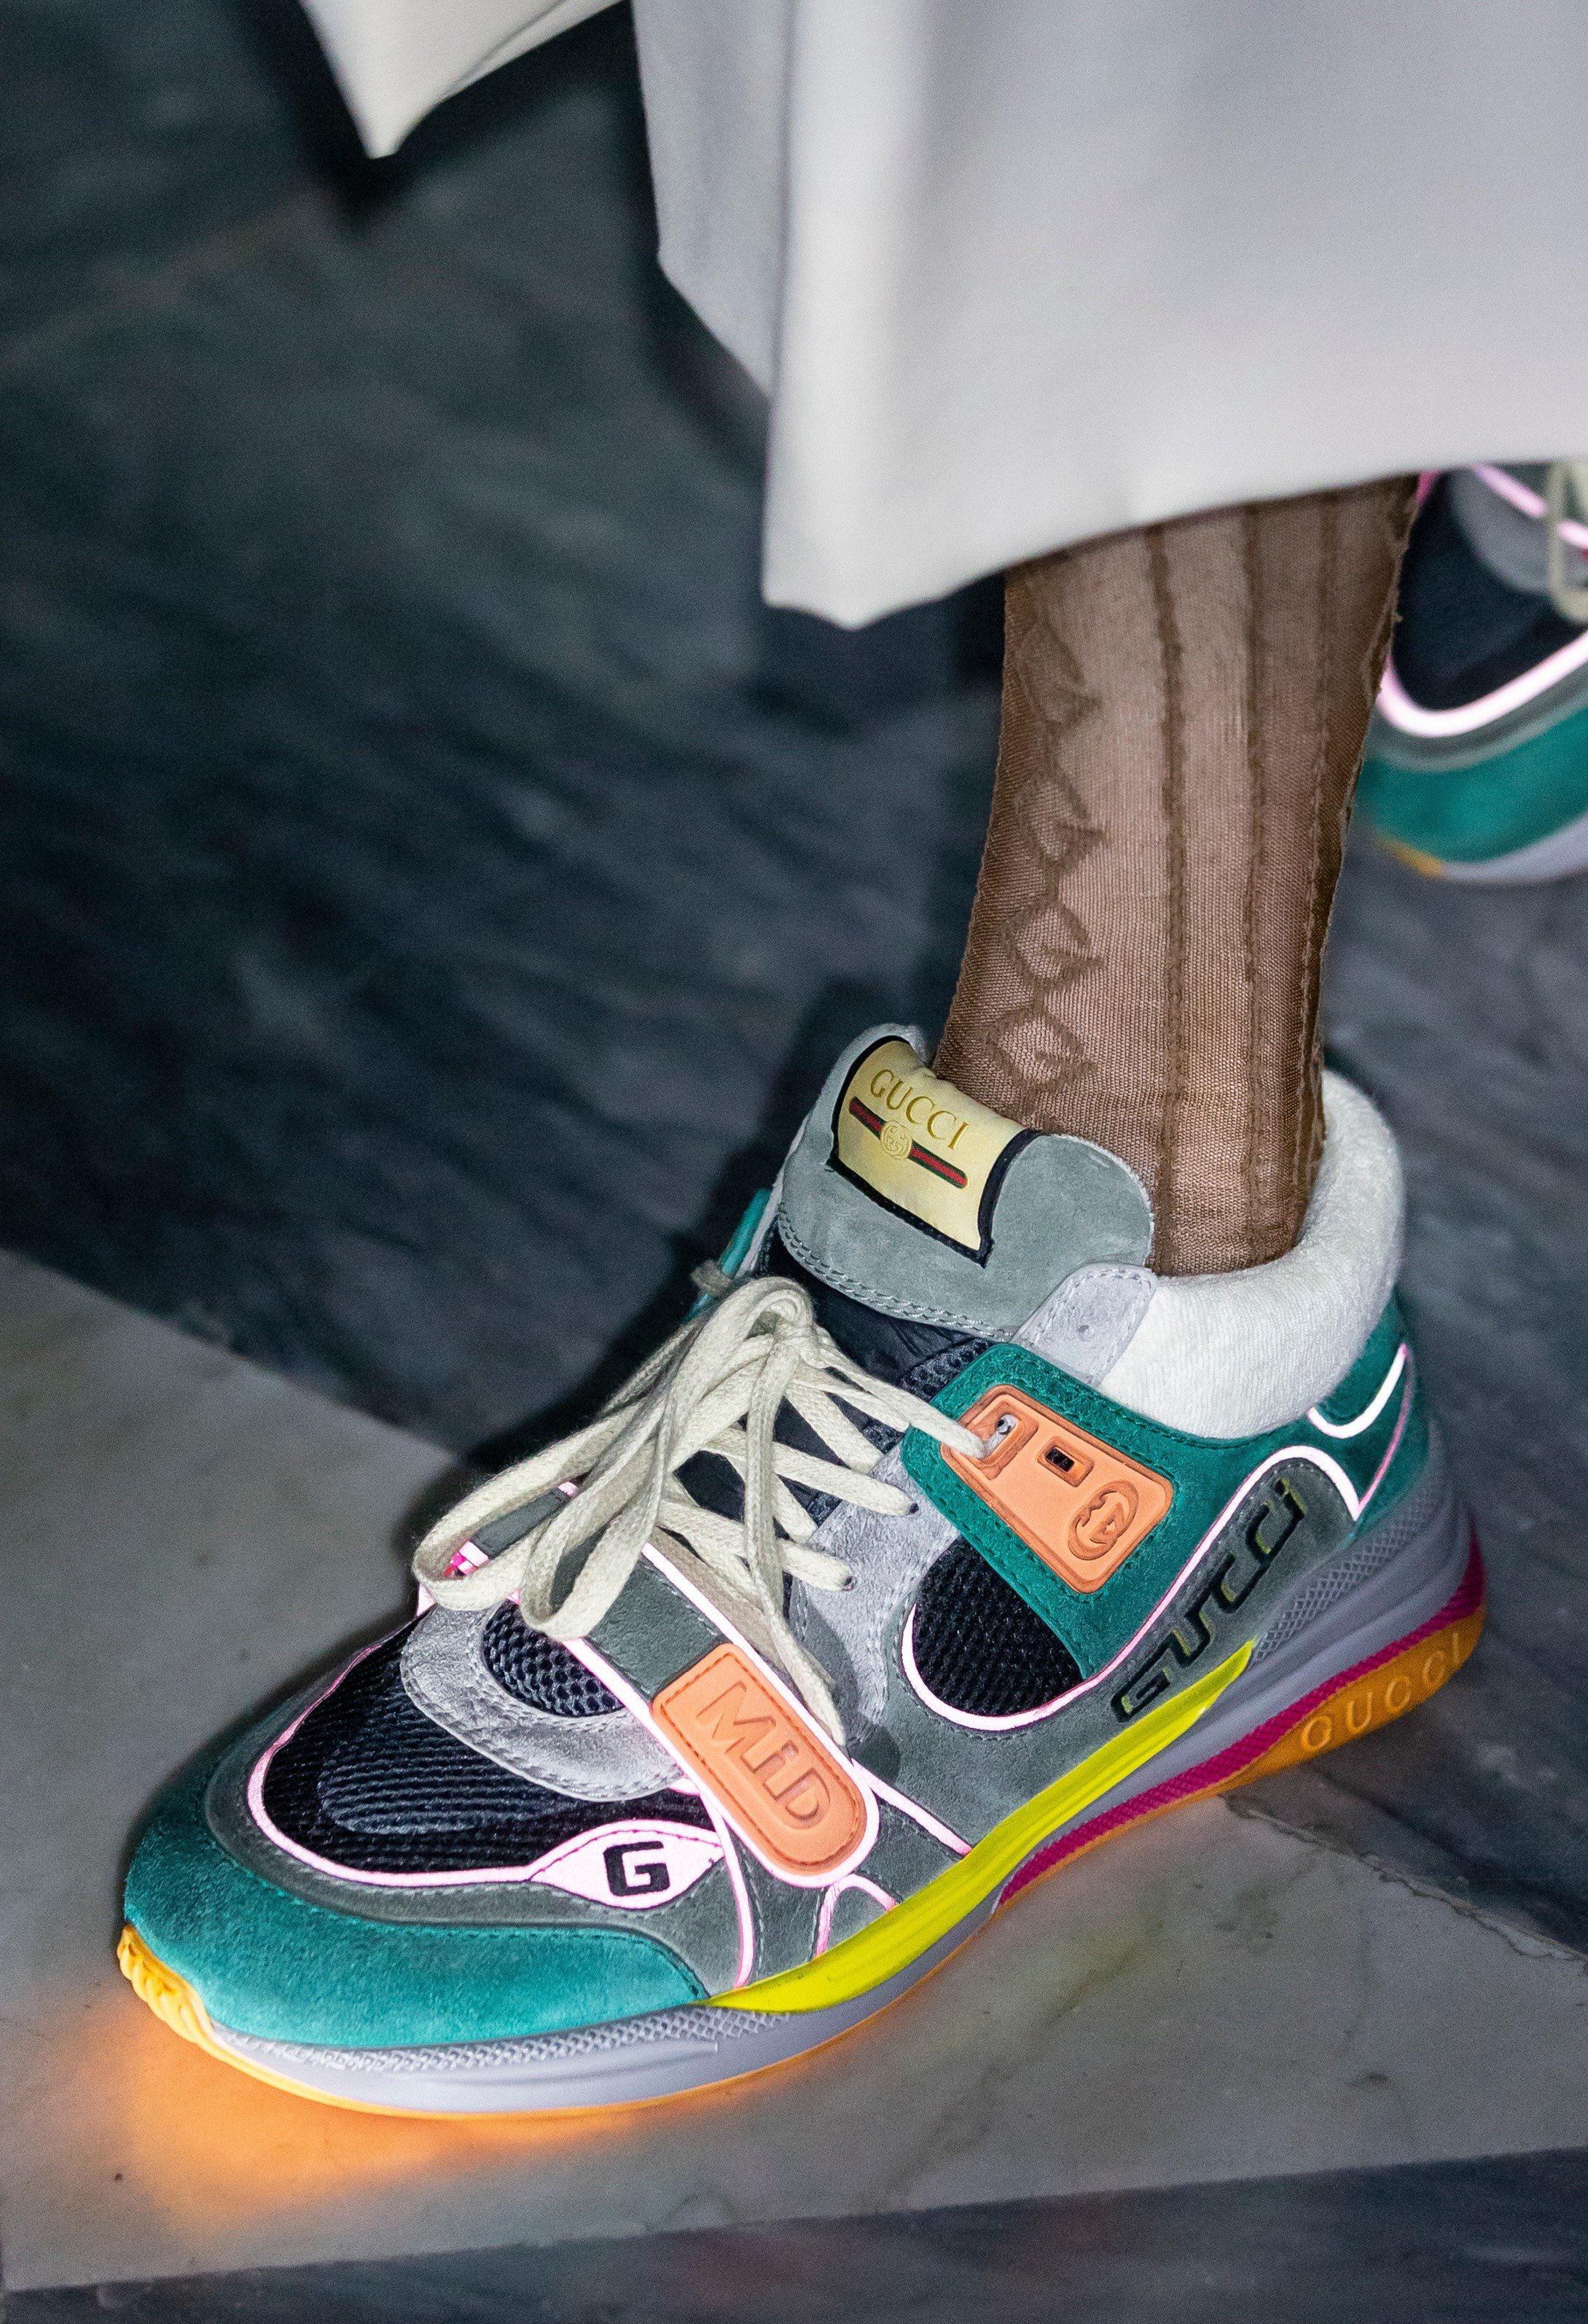 gucci style sneakers